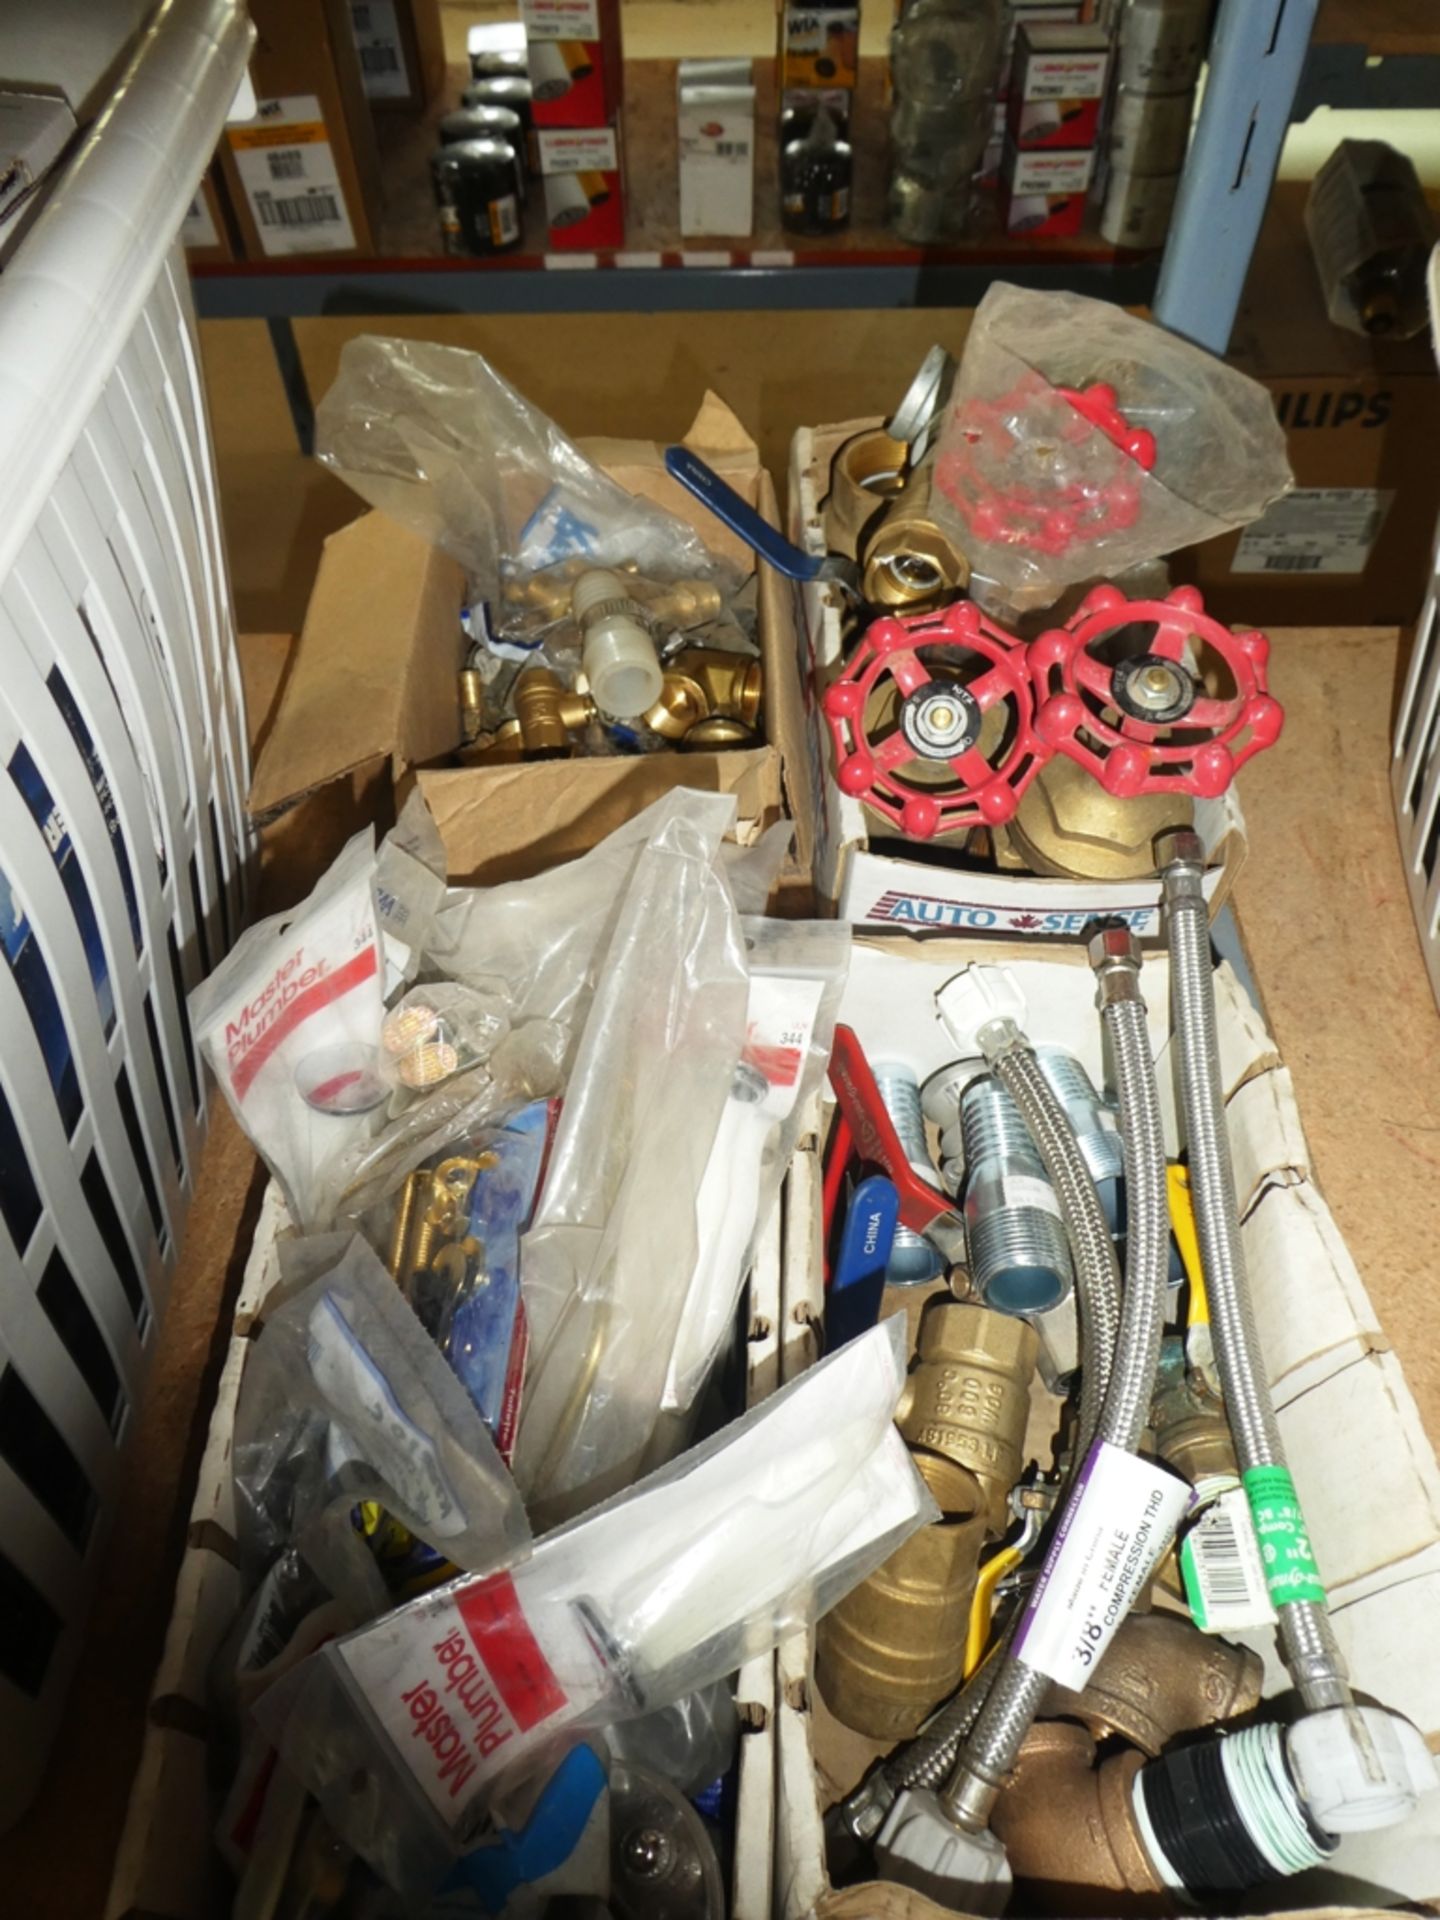 L/O ABS PLUMBING SUPPLIES, TOILET FILL VALVES, PEX FITTINGS, SHOWER & SINK FAUCETS & HARDWARE - Image 6 of 6